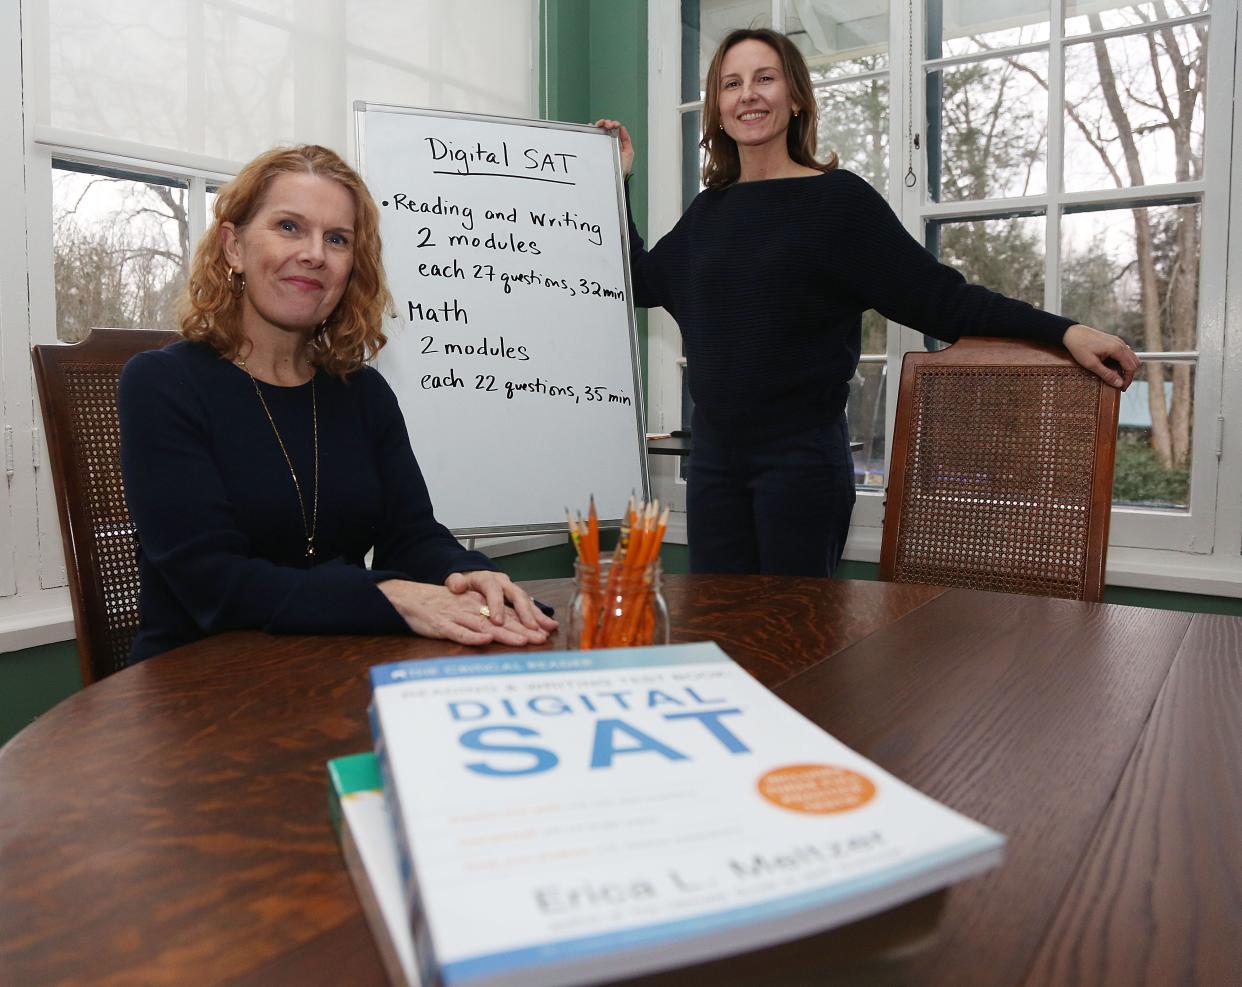 Ridgewood, NJ -- January 29, 2024 -- Meaghan Ozaydin and Sarah Burton are co-owners of Aspen Tutoring in Ridgewood.They prepare students for the new Digital SAT tests.